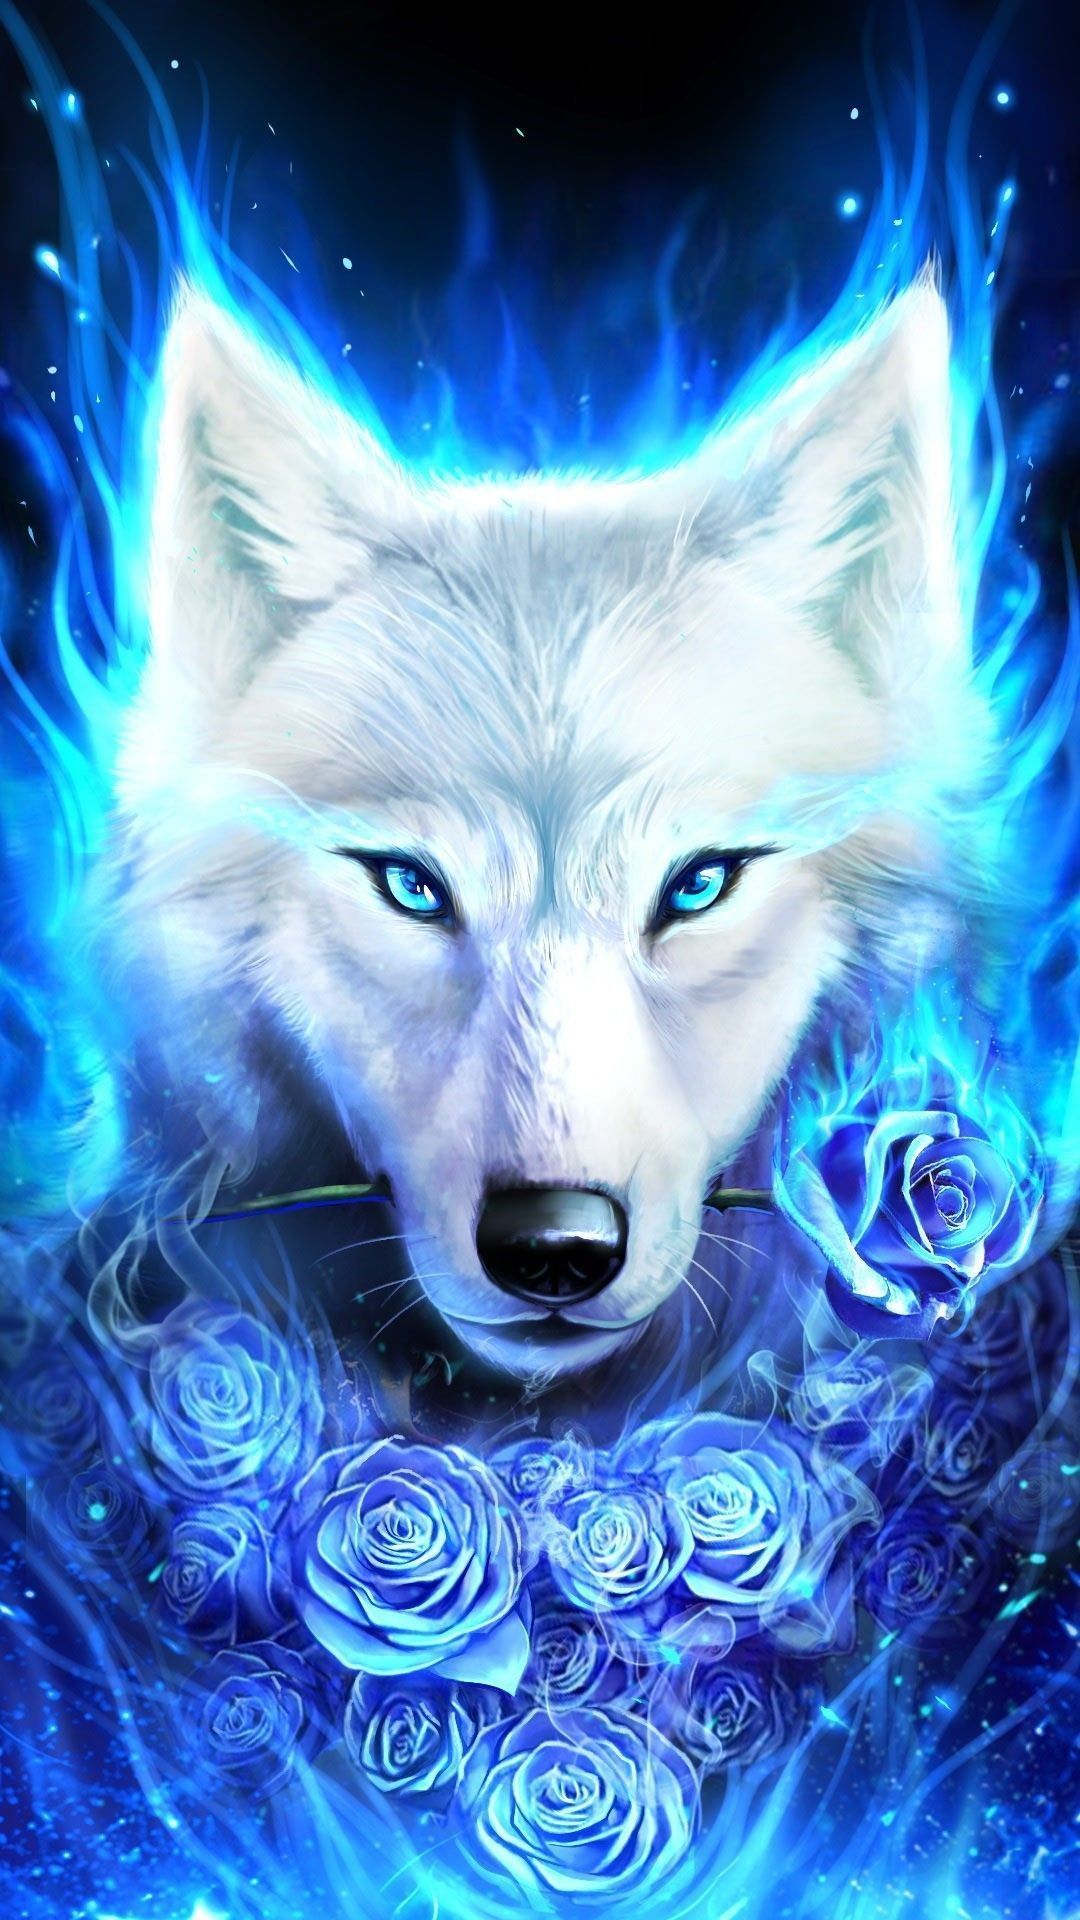 Epic Wolf Wallpaper Background For iPhone Wallpaper on Hupages.com, if you like it dont forget save it or. Wolf spirit animal, Ice wolf wallpaper, Wolf wallpaper